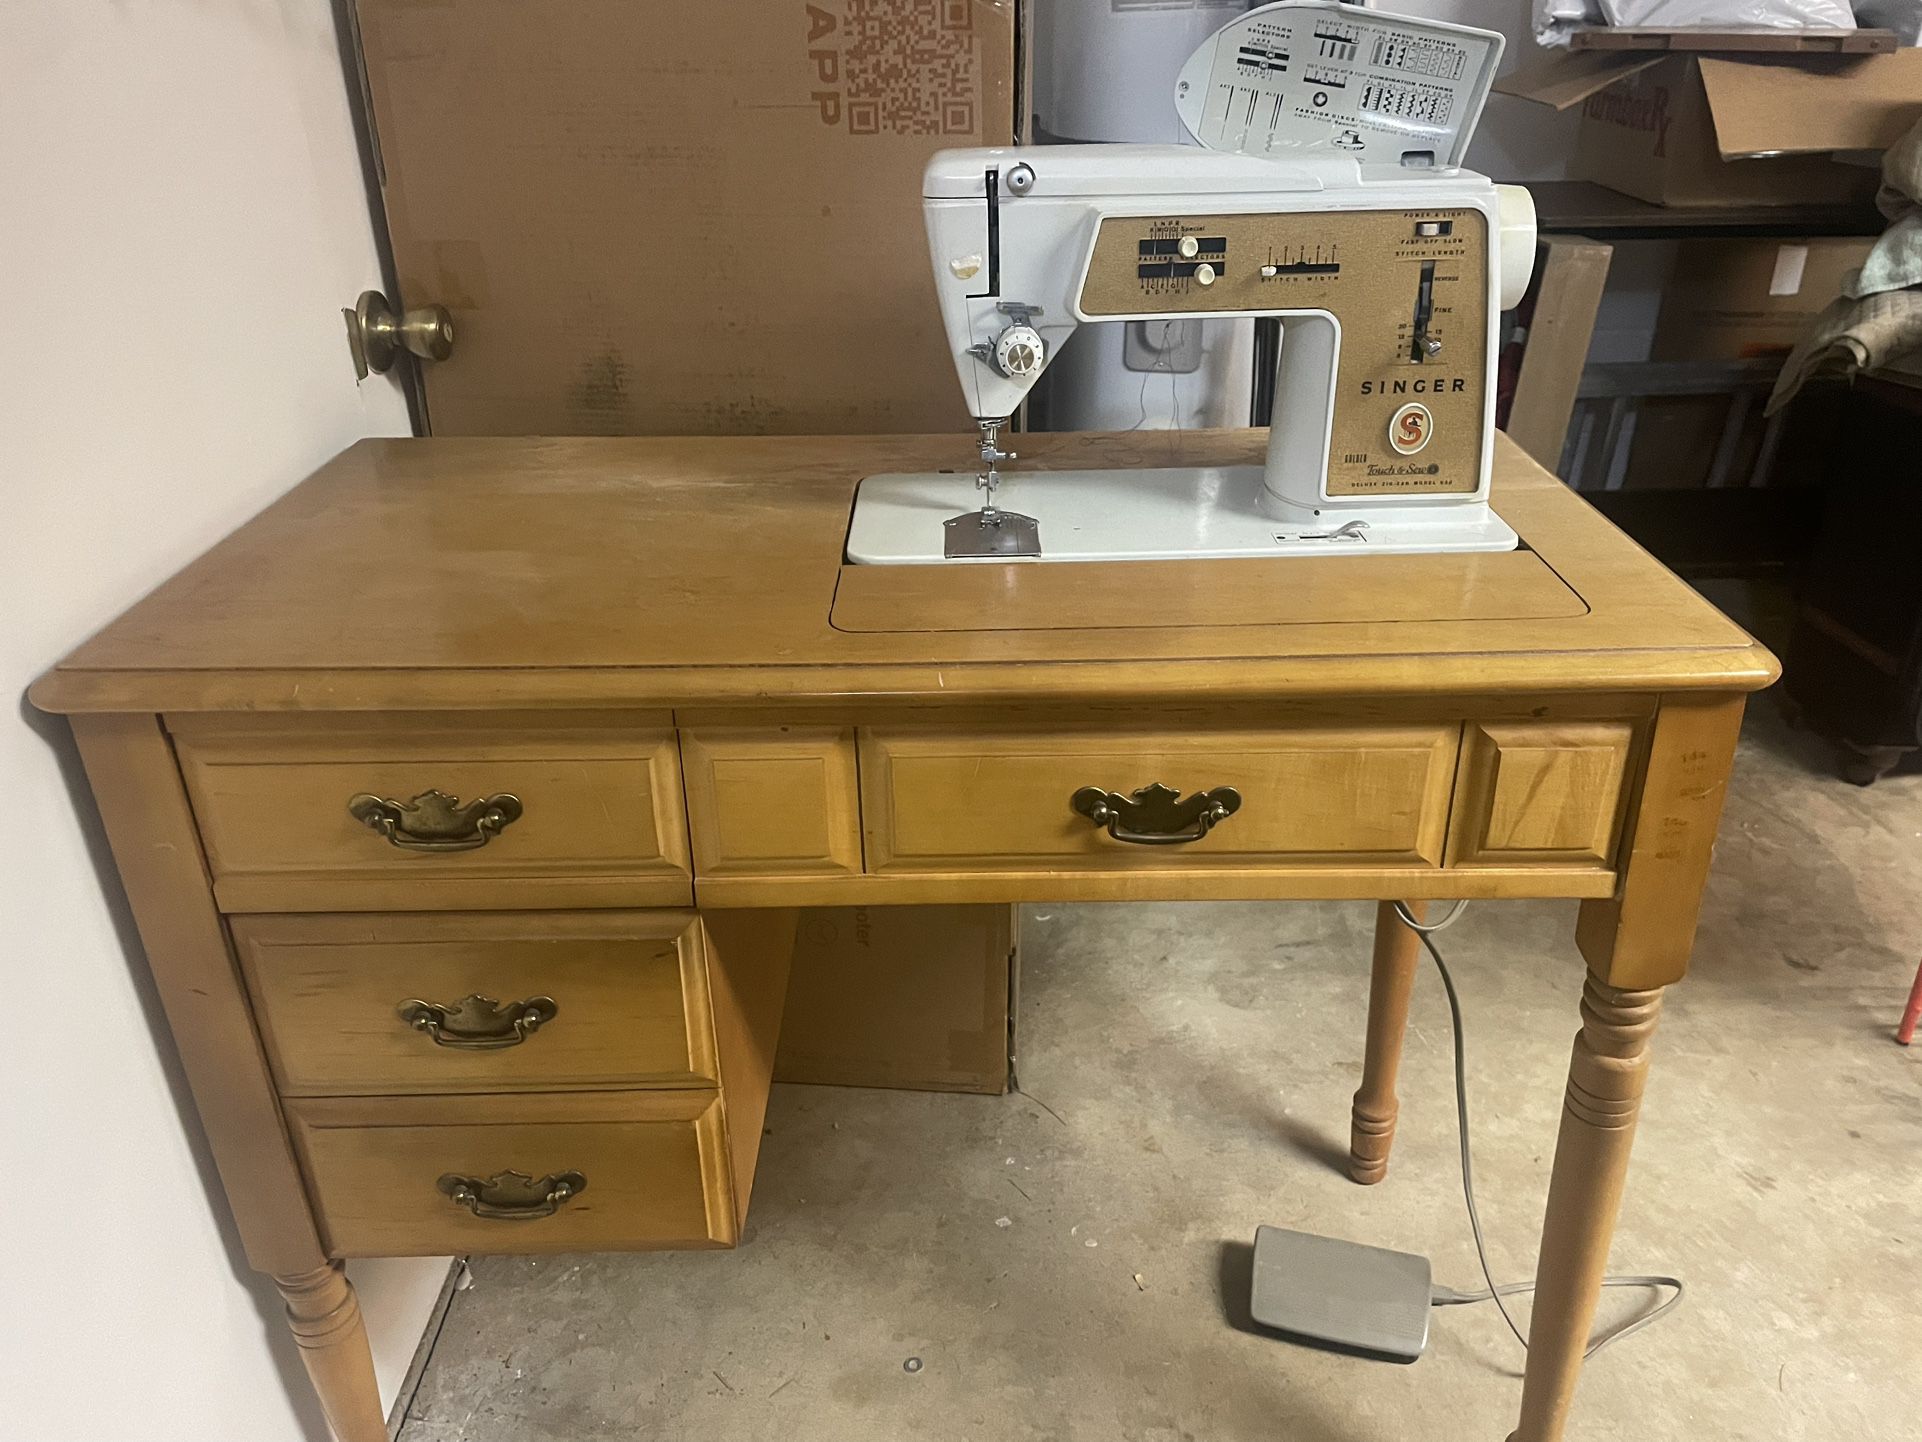 1960s - 70s Singer Sewing Machine And Table